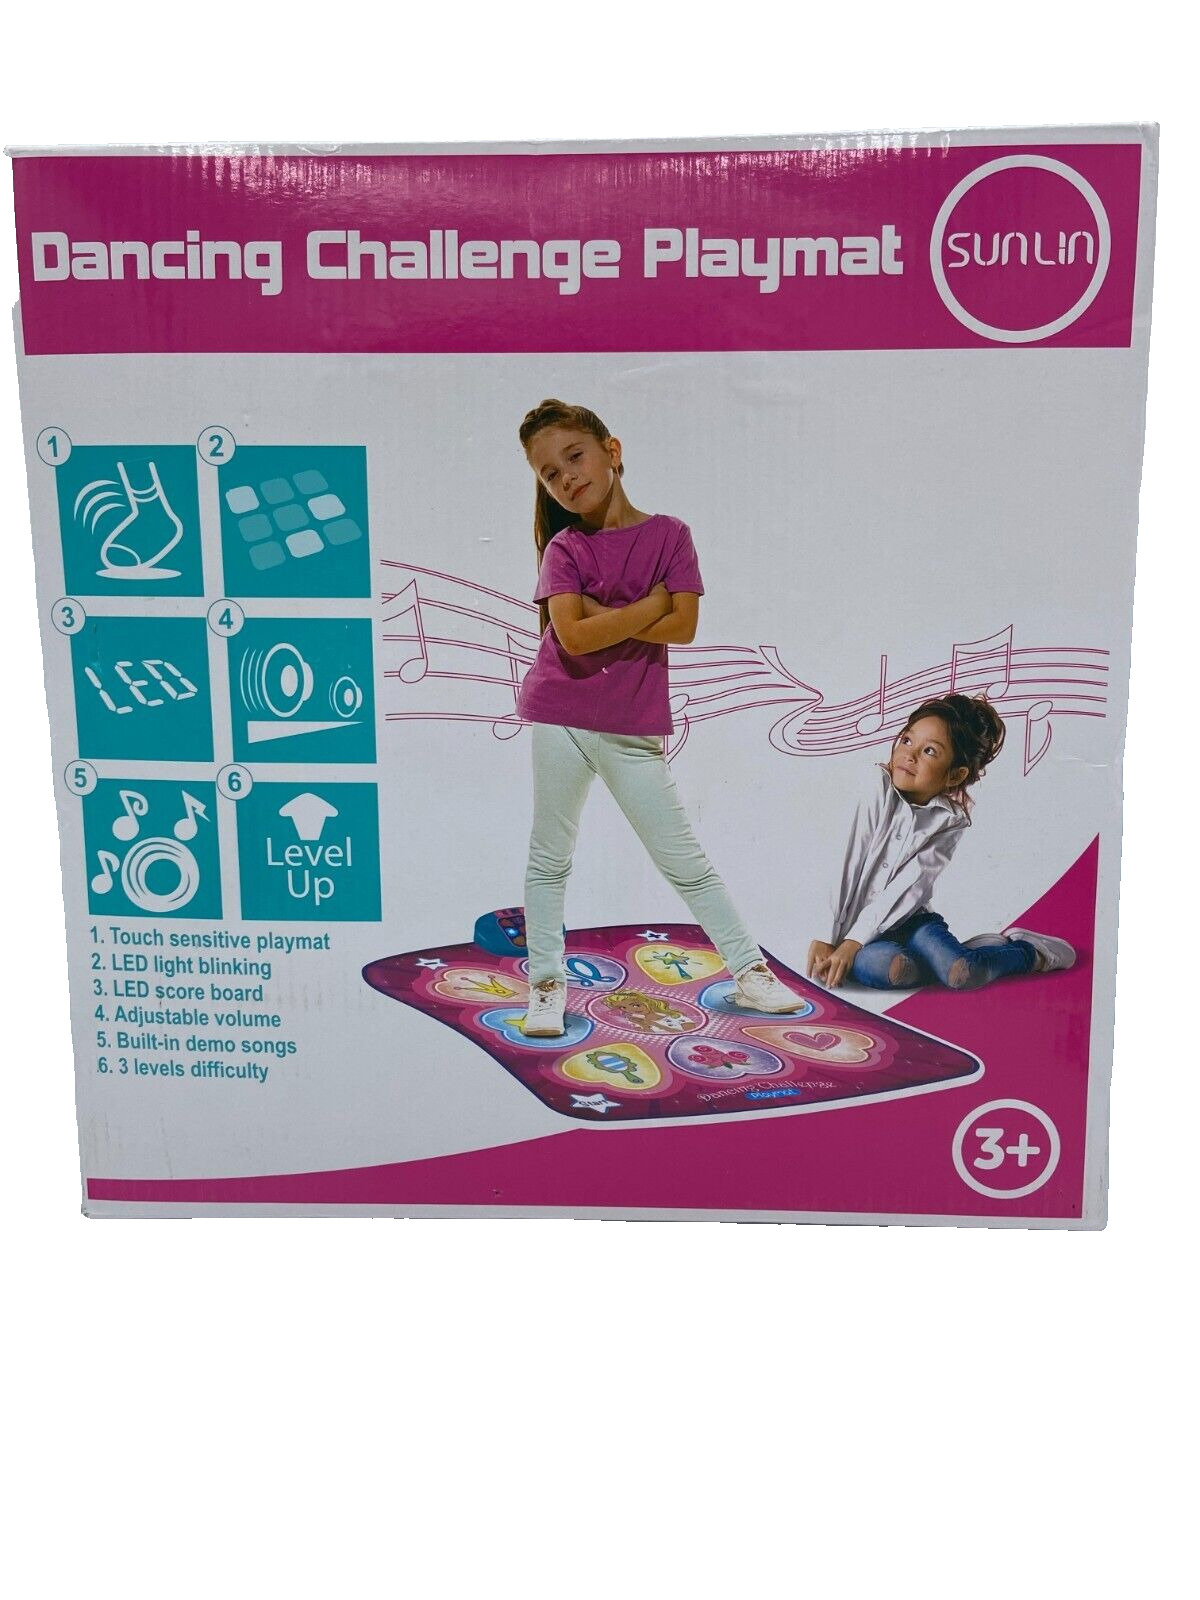 Dancing Challenge Playmat by Sunlin